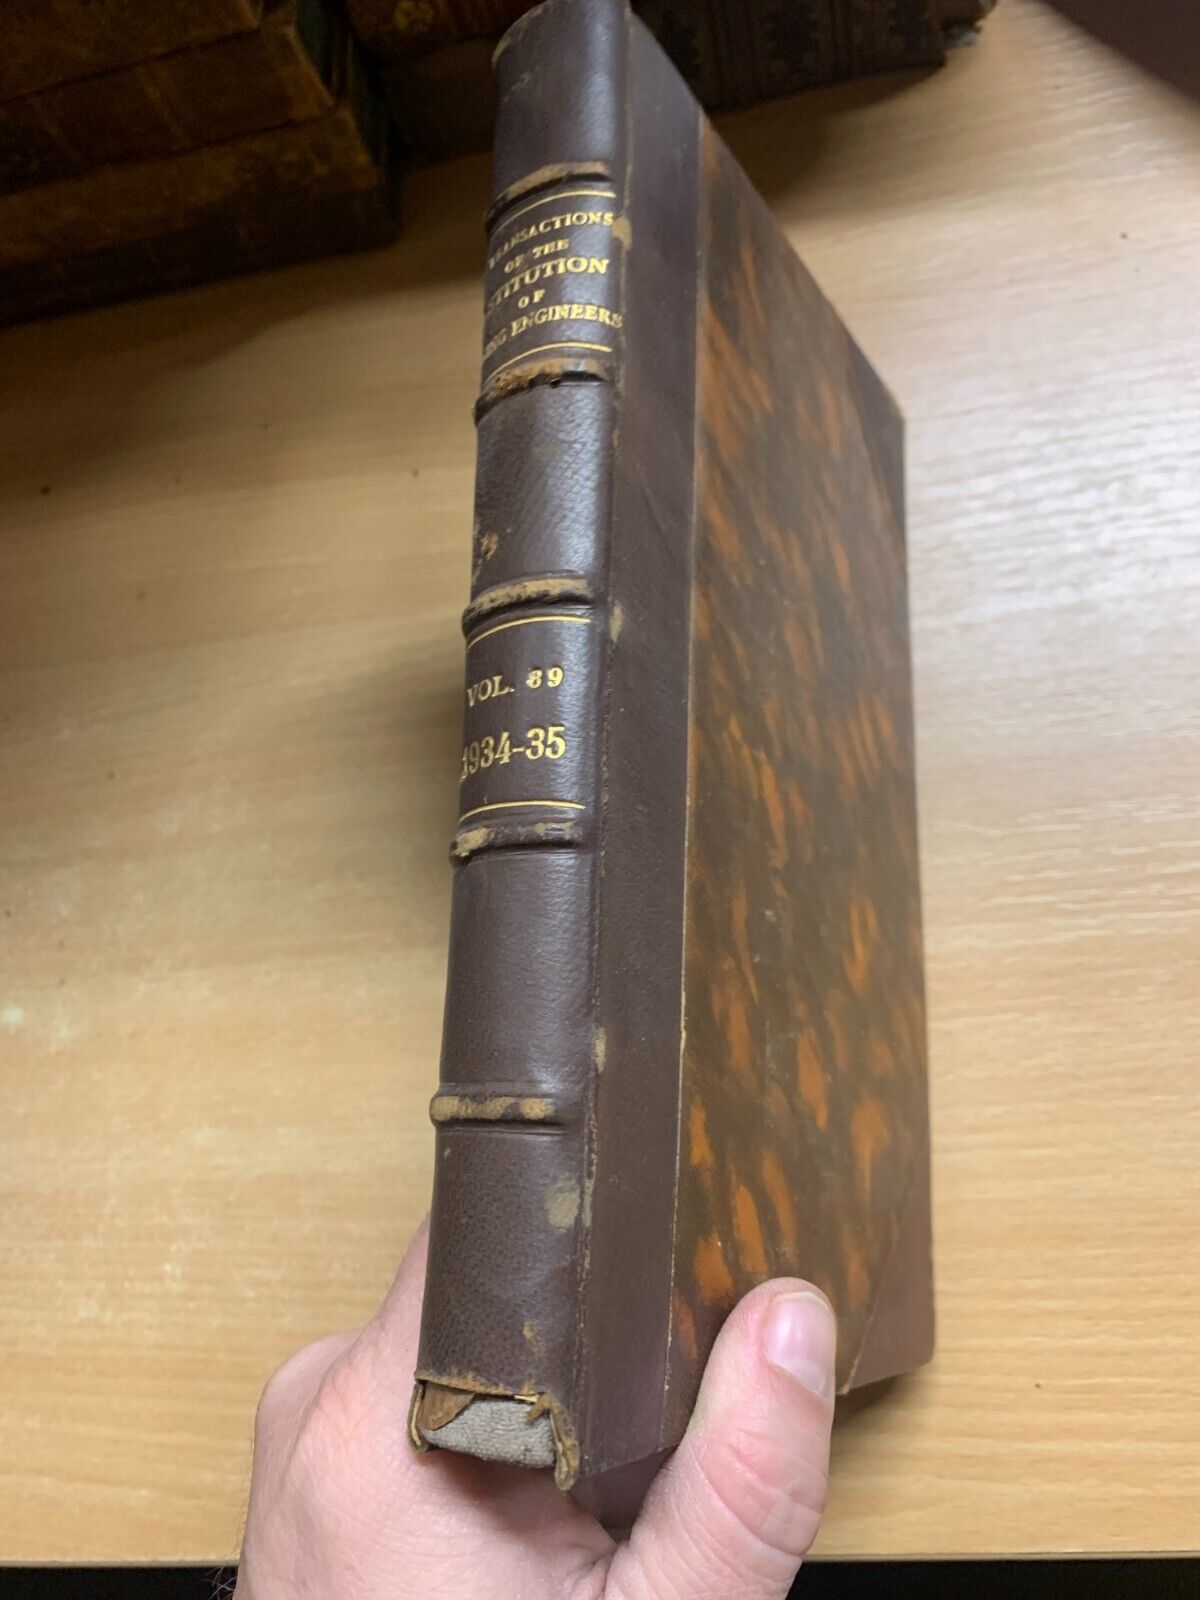 *RARE* 1935 TRANSACTIONS OF THE INSTITUTION OF MINING ENGINEERS VOL 89 BOOK (P5)